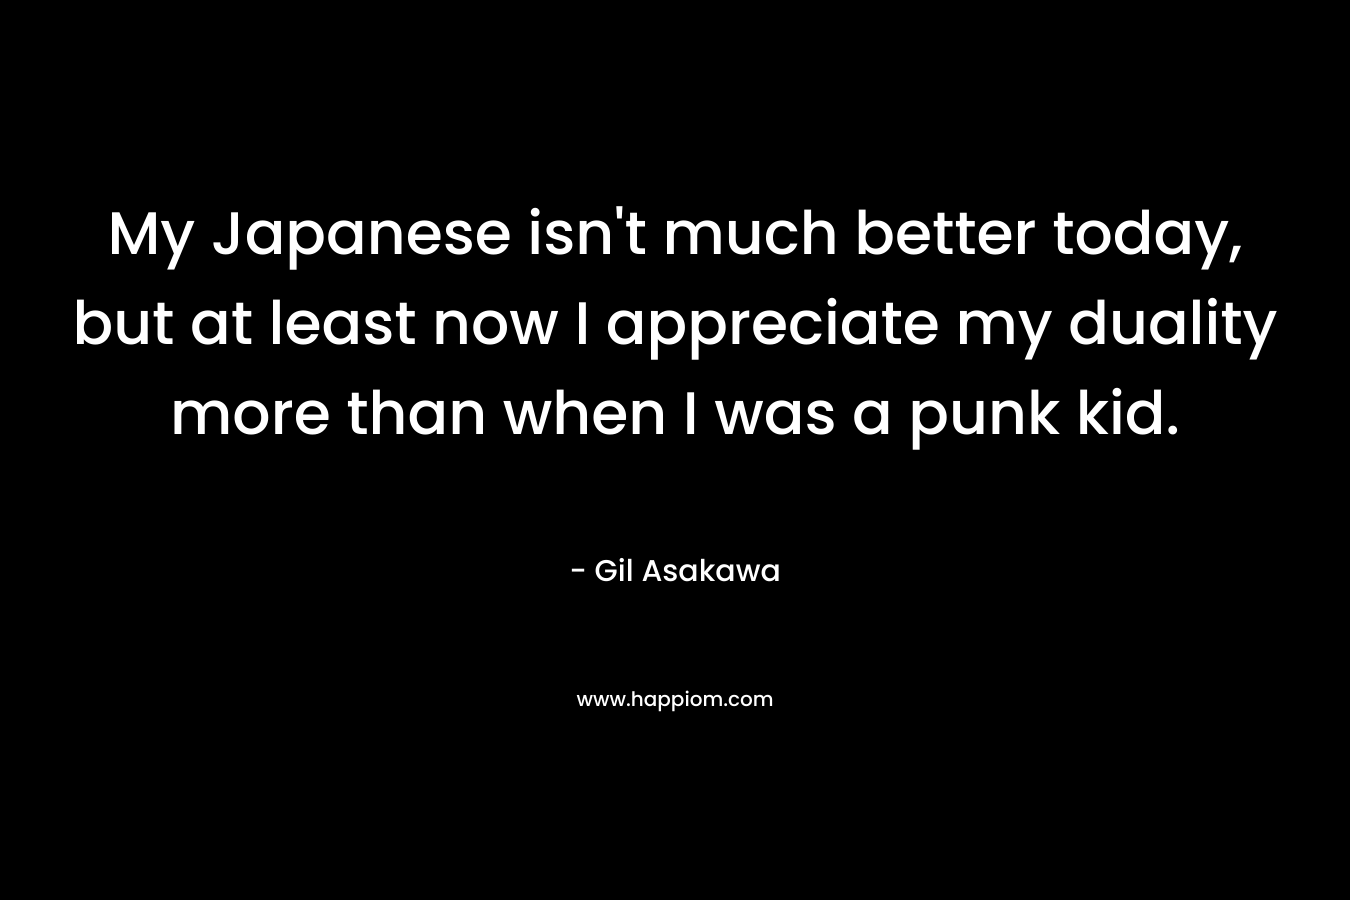 My Japanese isn’t much better today, but at least now I appreciate my duality more than when I was a punk kid. – Gil Asakawa